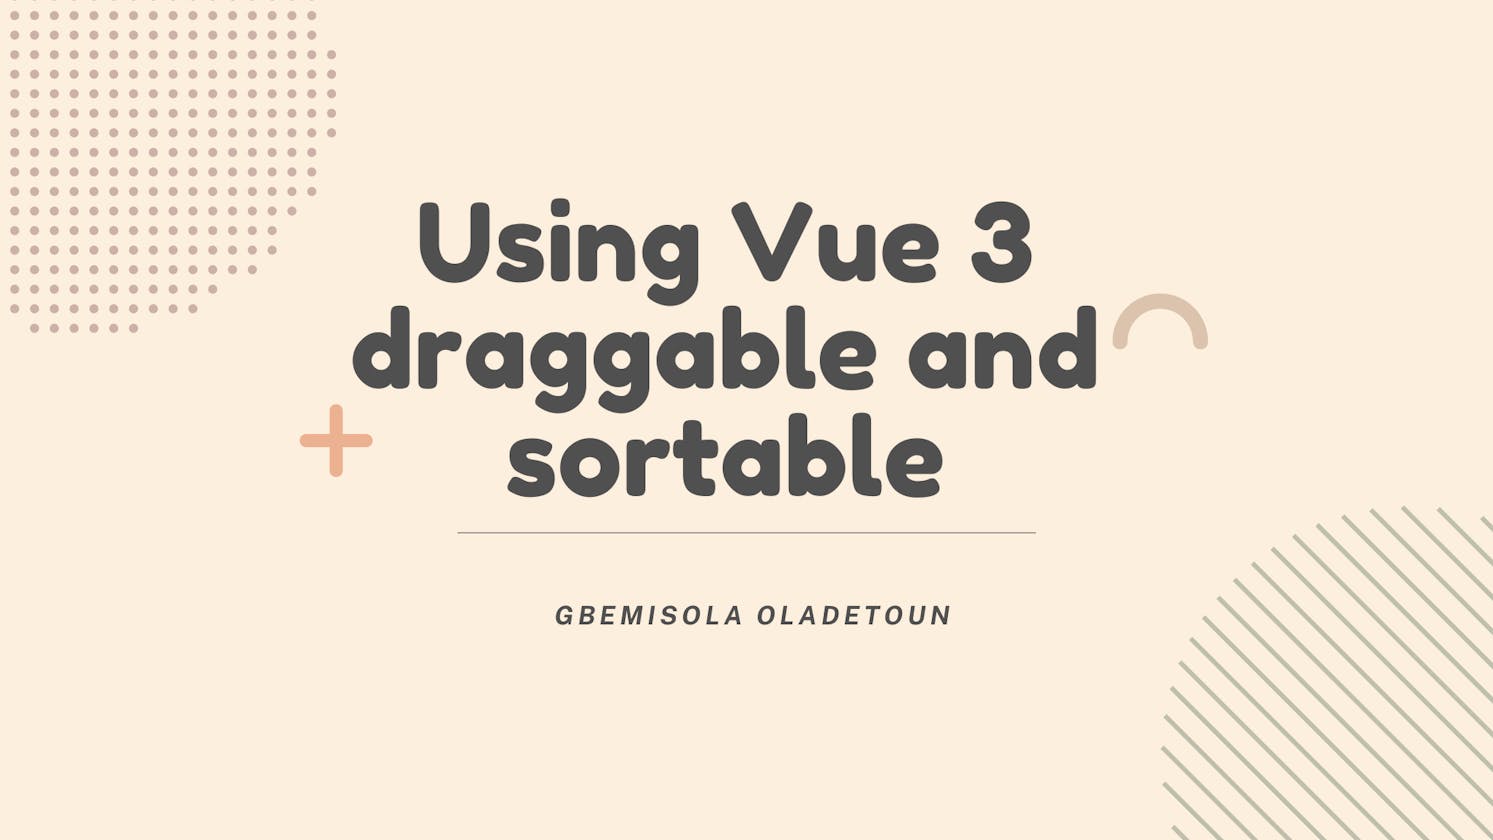 Using Vue 3 draggable and sortable